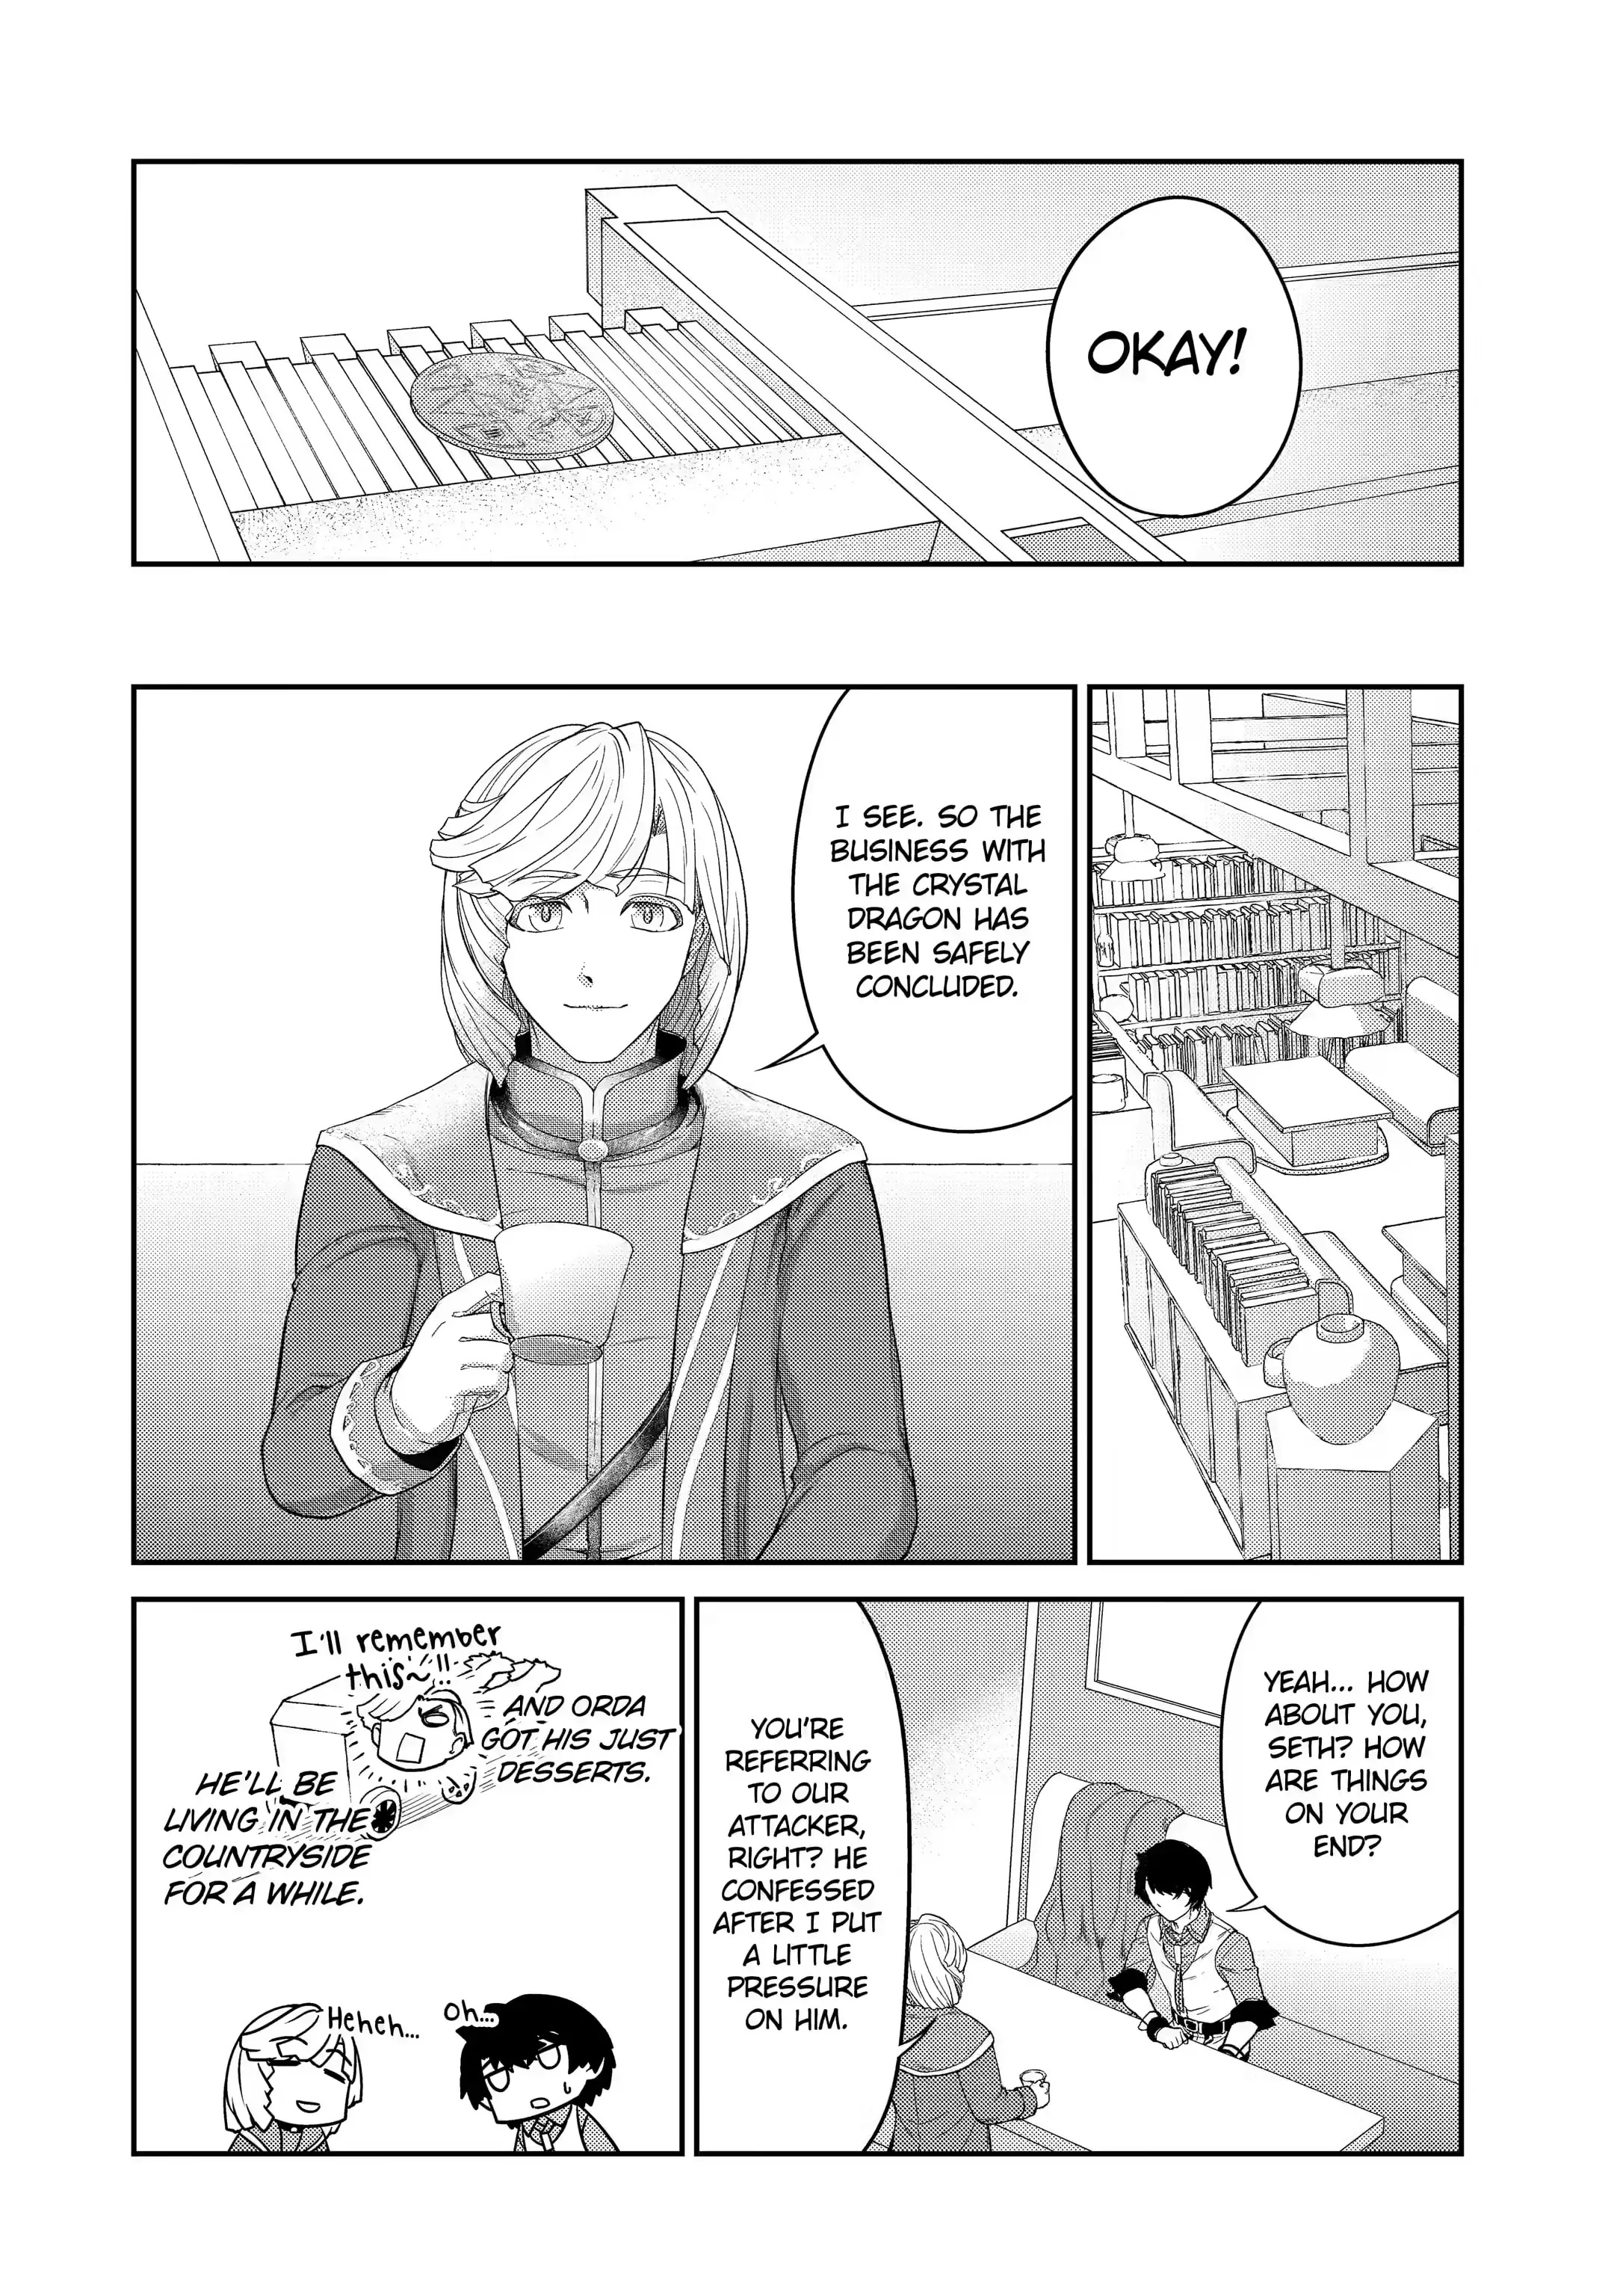 I’m an Alchemist Who Doesn’t Know How OP I Am - chapter 18.2 - #4